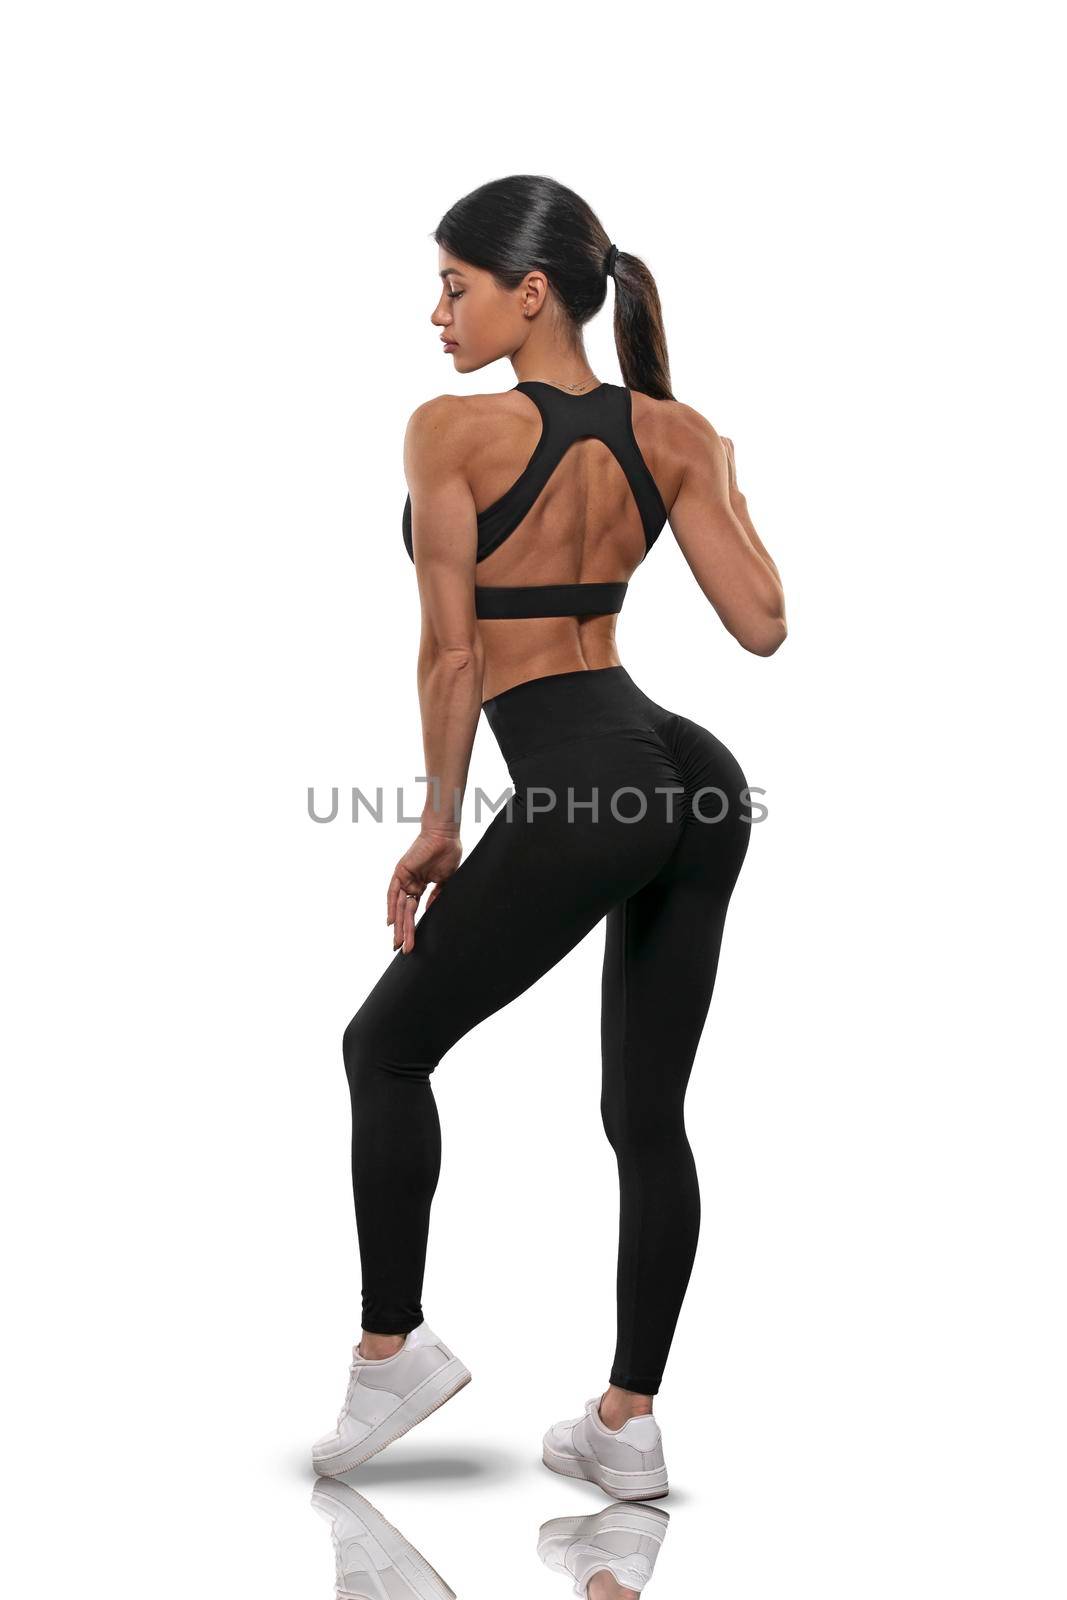 girl in black leggings and a top stay back on a white background by but_photo